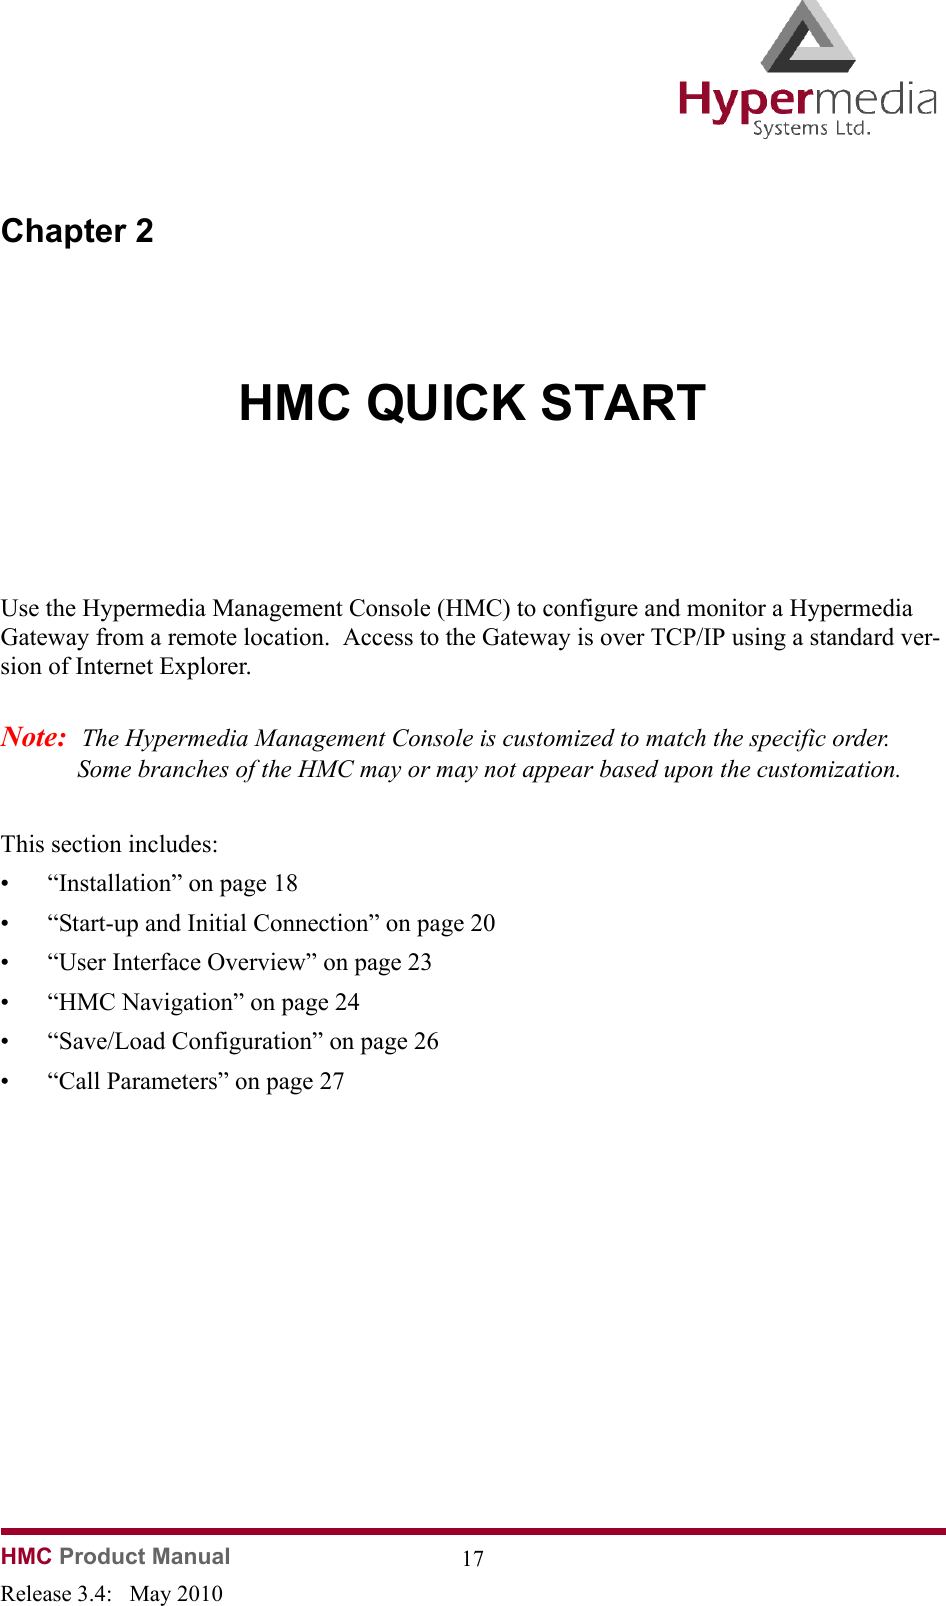 HMC Product Manual  17Release 3.4:   May 2010Chapter 2HMC QUICK STARTUse the Hypermedia Management Console (HMC) to configure and monitor a Hypermedia Gateway from a remote location.  Access to the Gateway is over TCP/IP using a standard ver-sion of Internet Explorer.  Note:  The Hypermedia Management Console is customized to match the specific order.  Some branches of the HMC may or may not appear based upon the customization.This section includes:  • “Installation” on page 18• “Start-up and Initial Connection” on page 20• “User Interface Overview” on page 23• “HMC Navigation” on page 24• “Save/Load Configuration” on page 26• “Call Parameters” on page 27